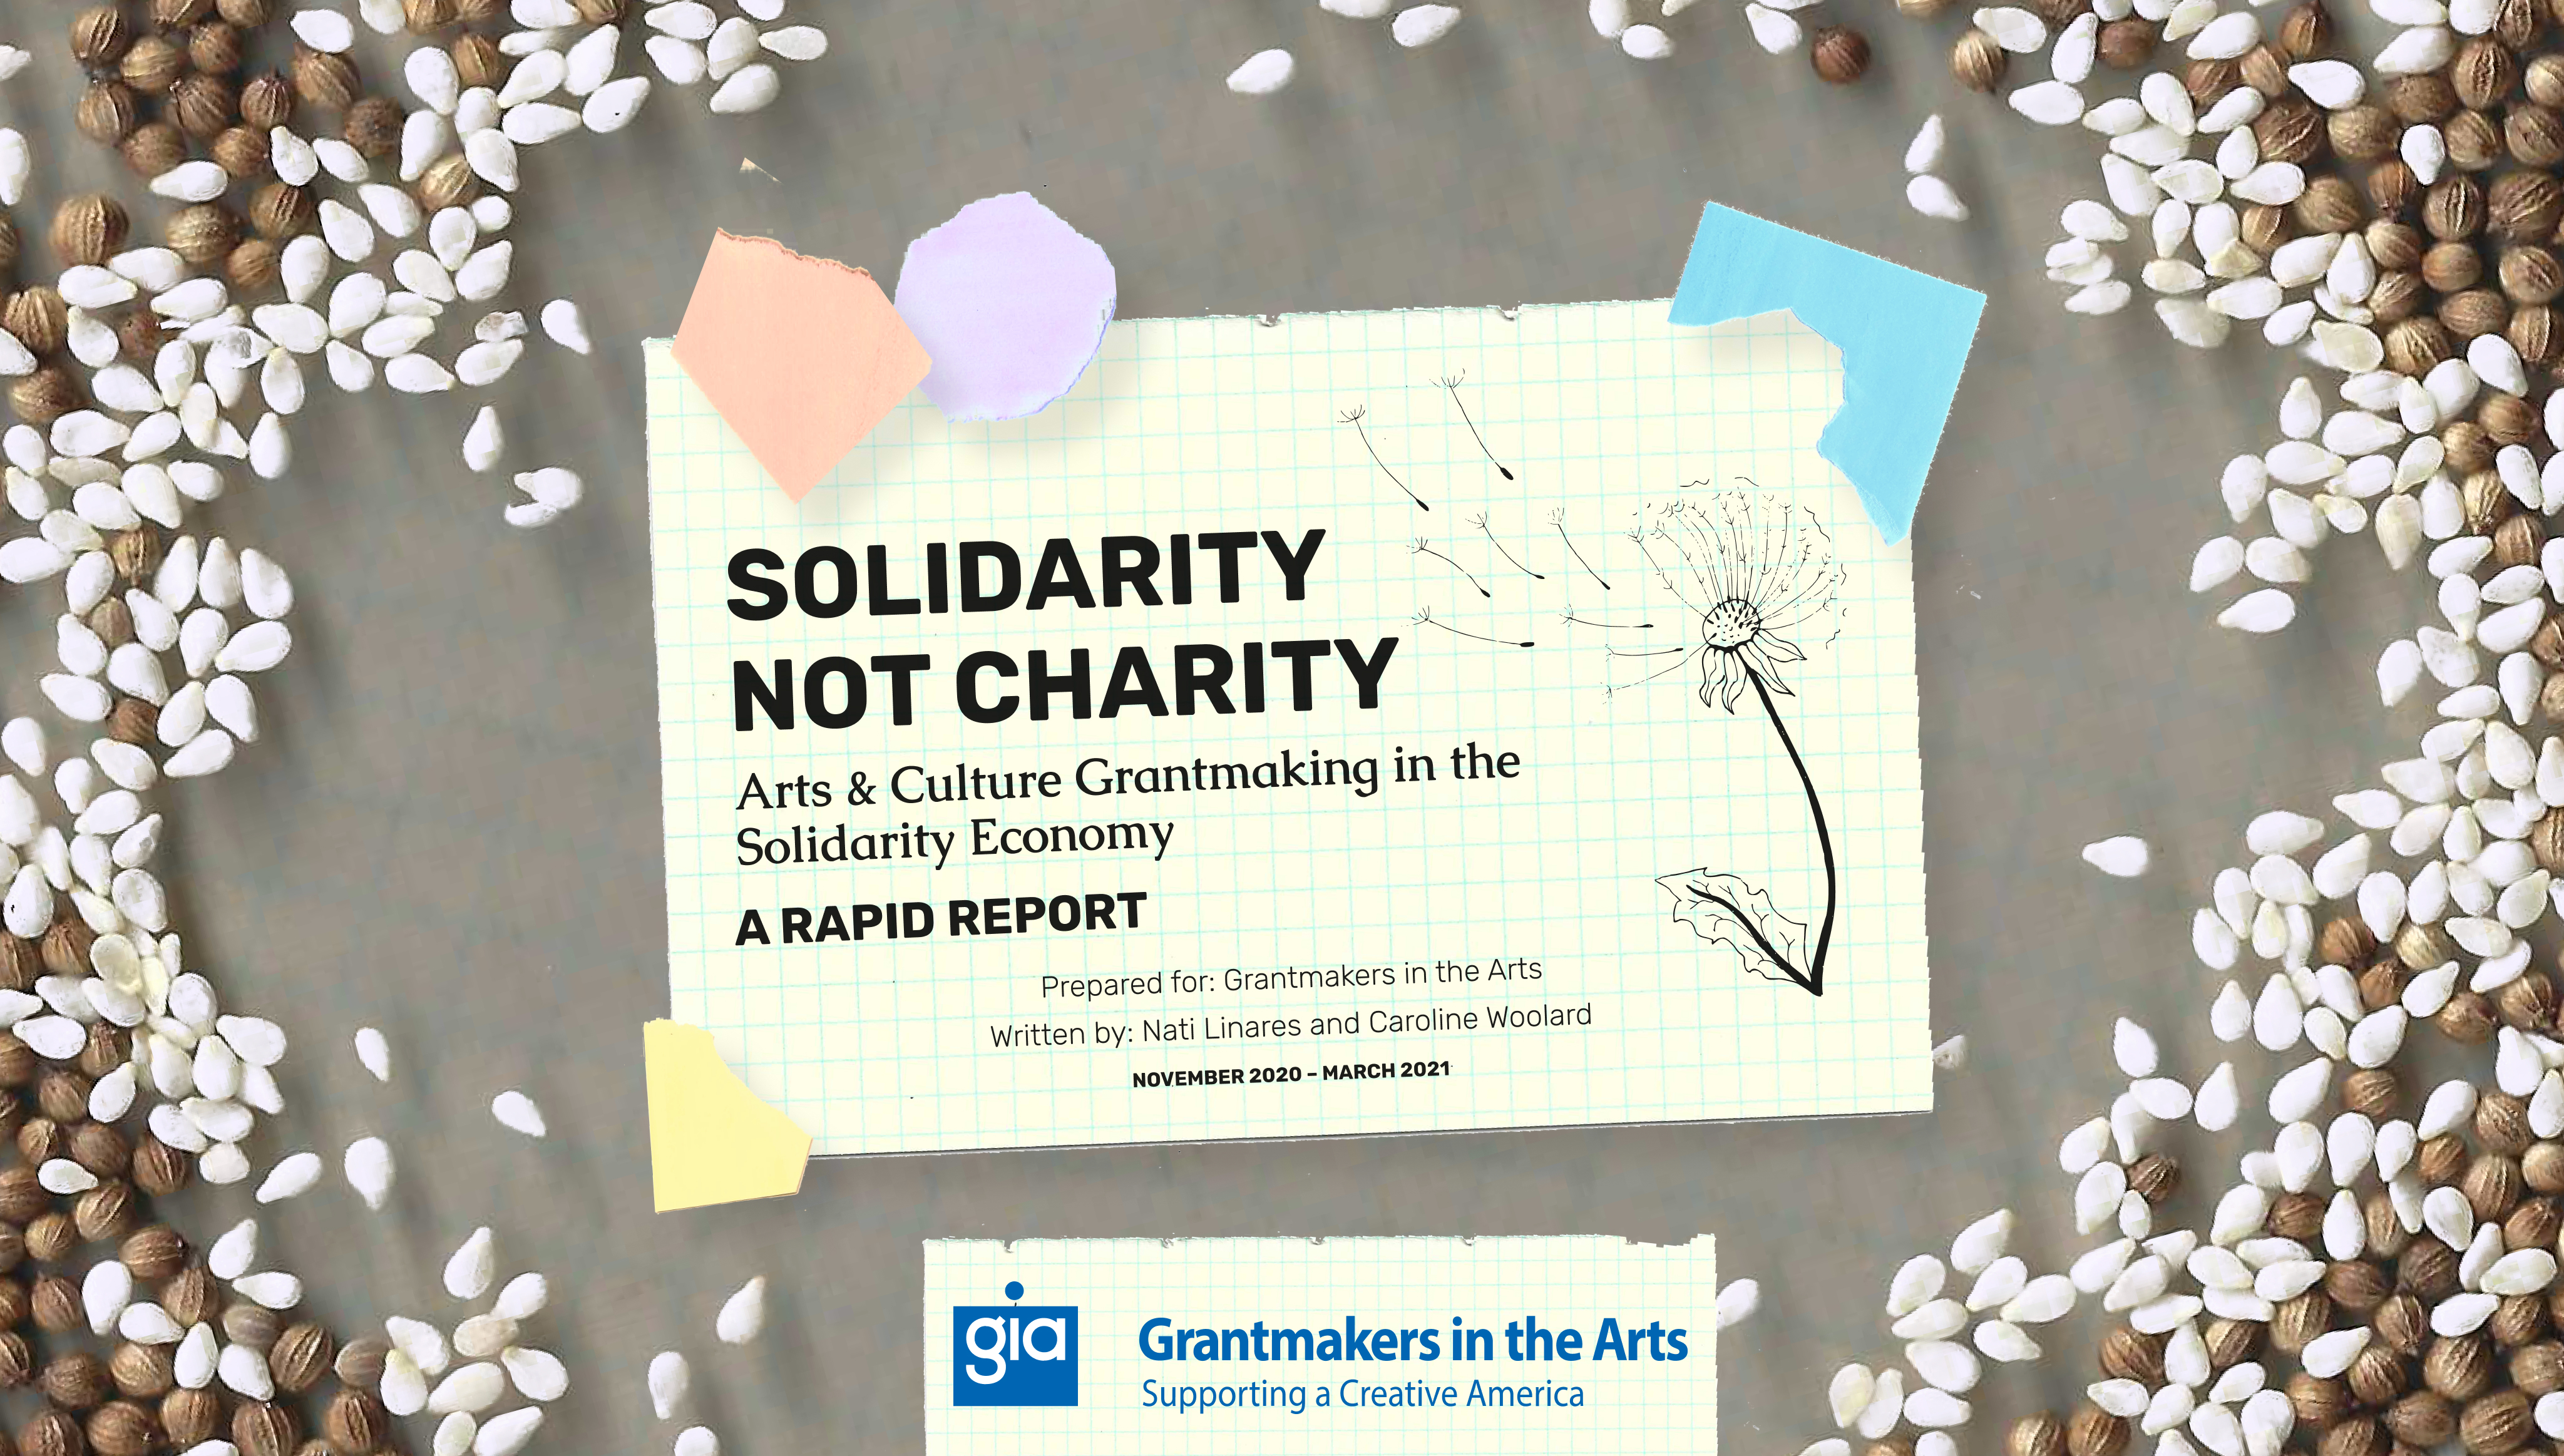 The words “Solidarity Not Charity: Arts & Culture Grantmaking in the Solidarity Economy - A Rapid Report” appear in a notepad background. The words "Prepared for Grantmakers in the Arts, Written by Nati Linares and Caroline Woolard" also appear. The Grantmakers in the Arts logo appears in blue in a notepad background, in the lower center of the graphic.